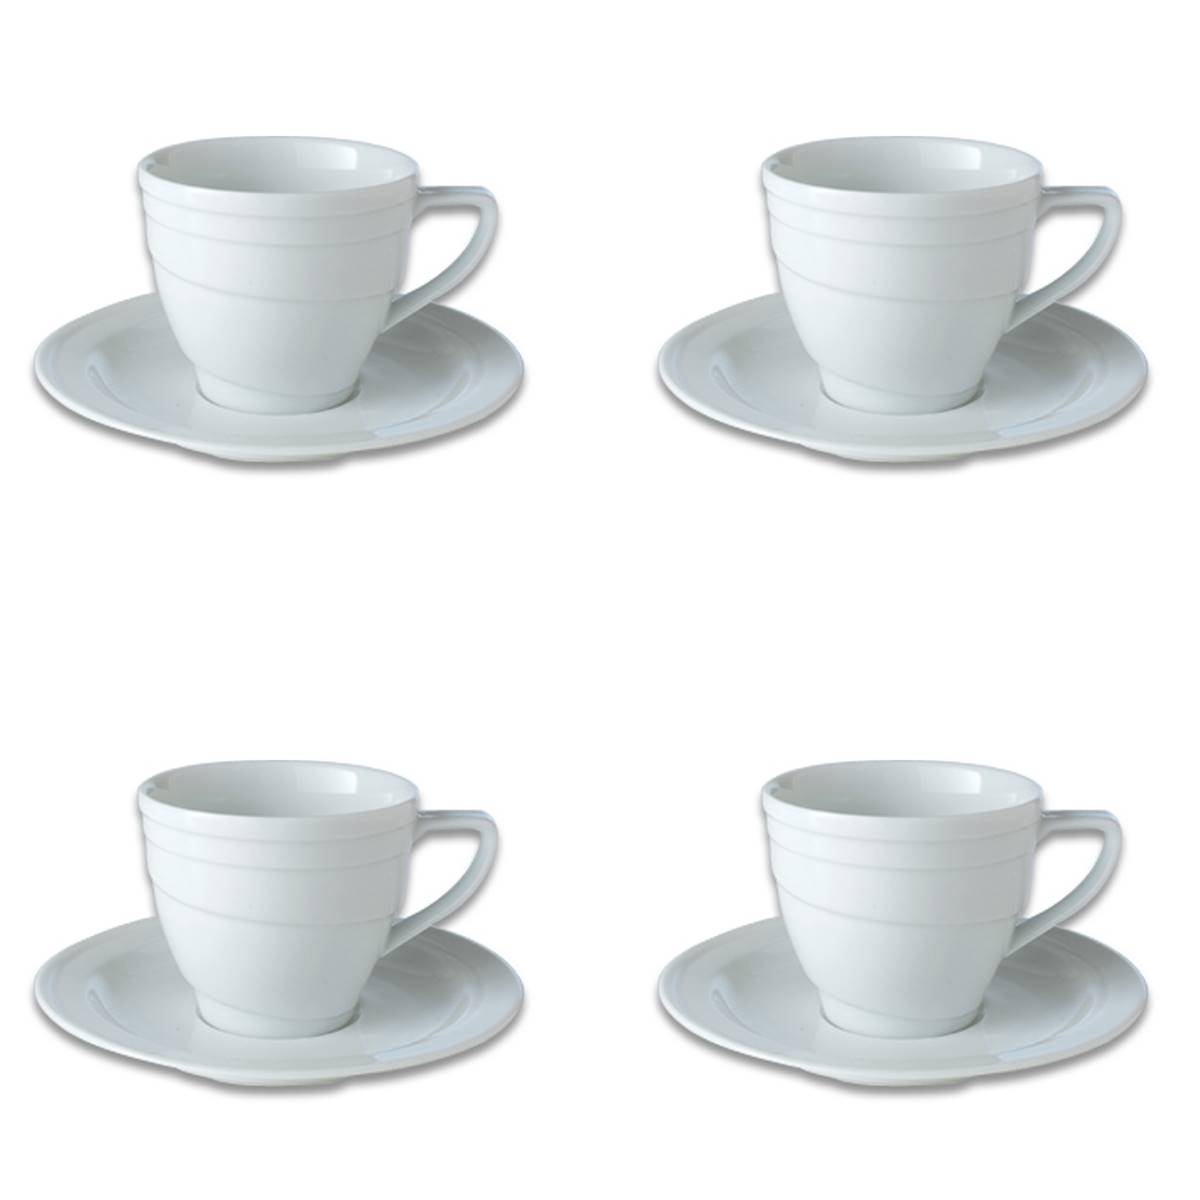 BergHOFF Essentials Hotel Teacup And Saucer Set Of 4